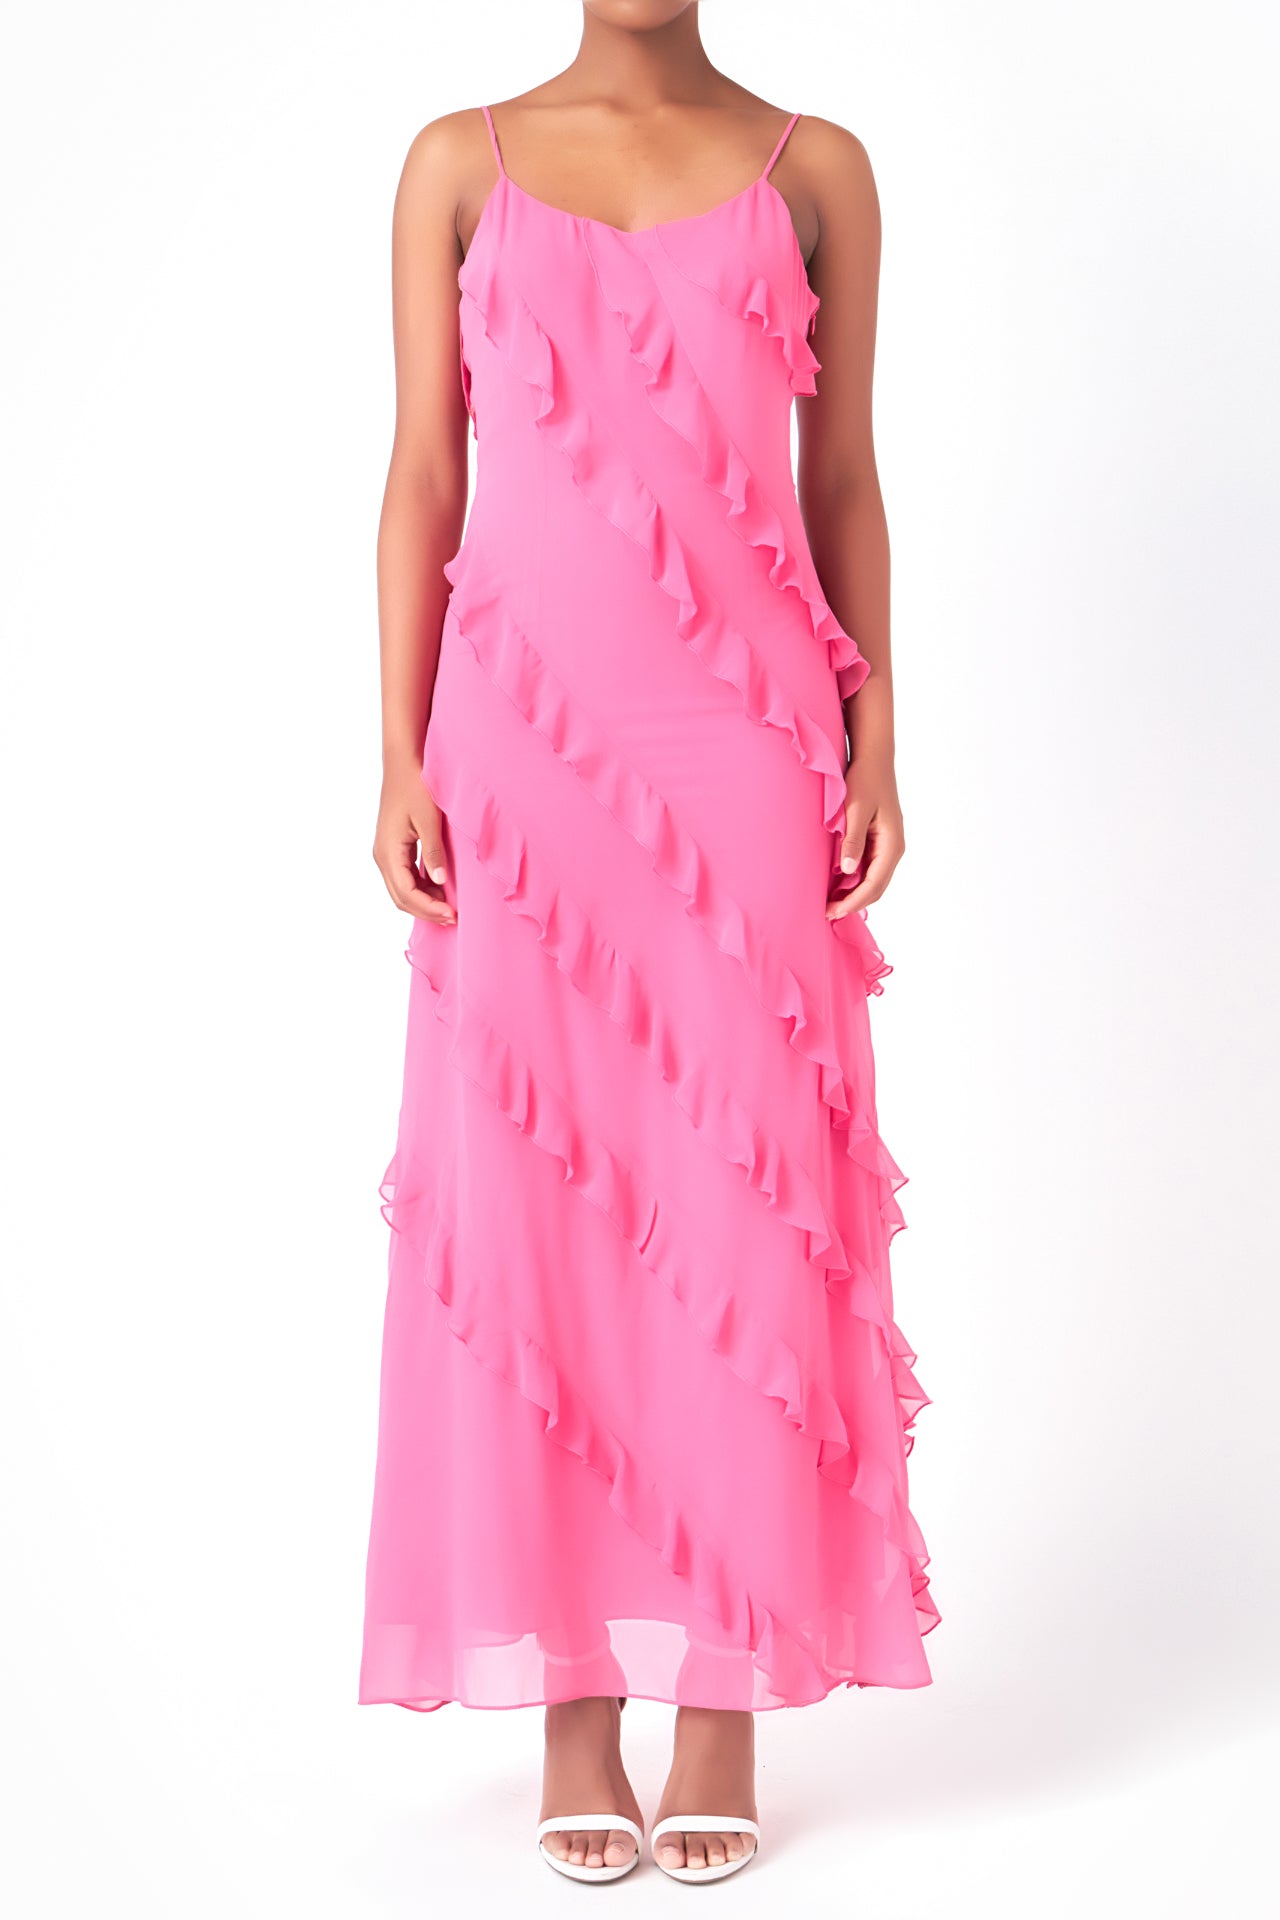 ENDLESS ROSE - Slip Ruffled Dress - DRESSES available at Objectrare